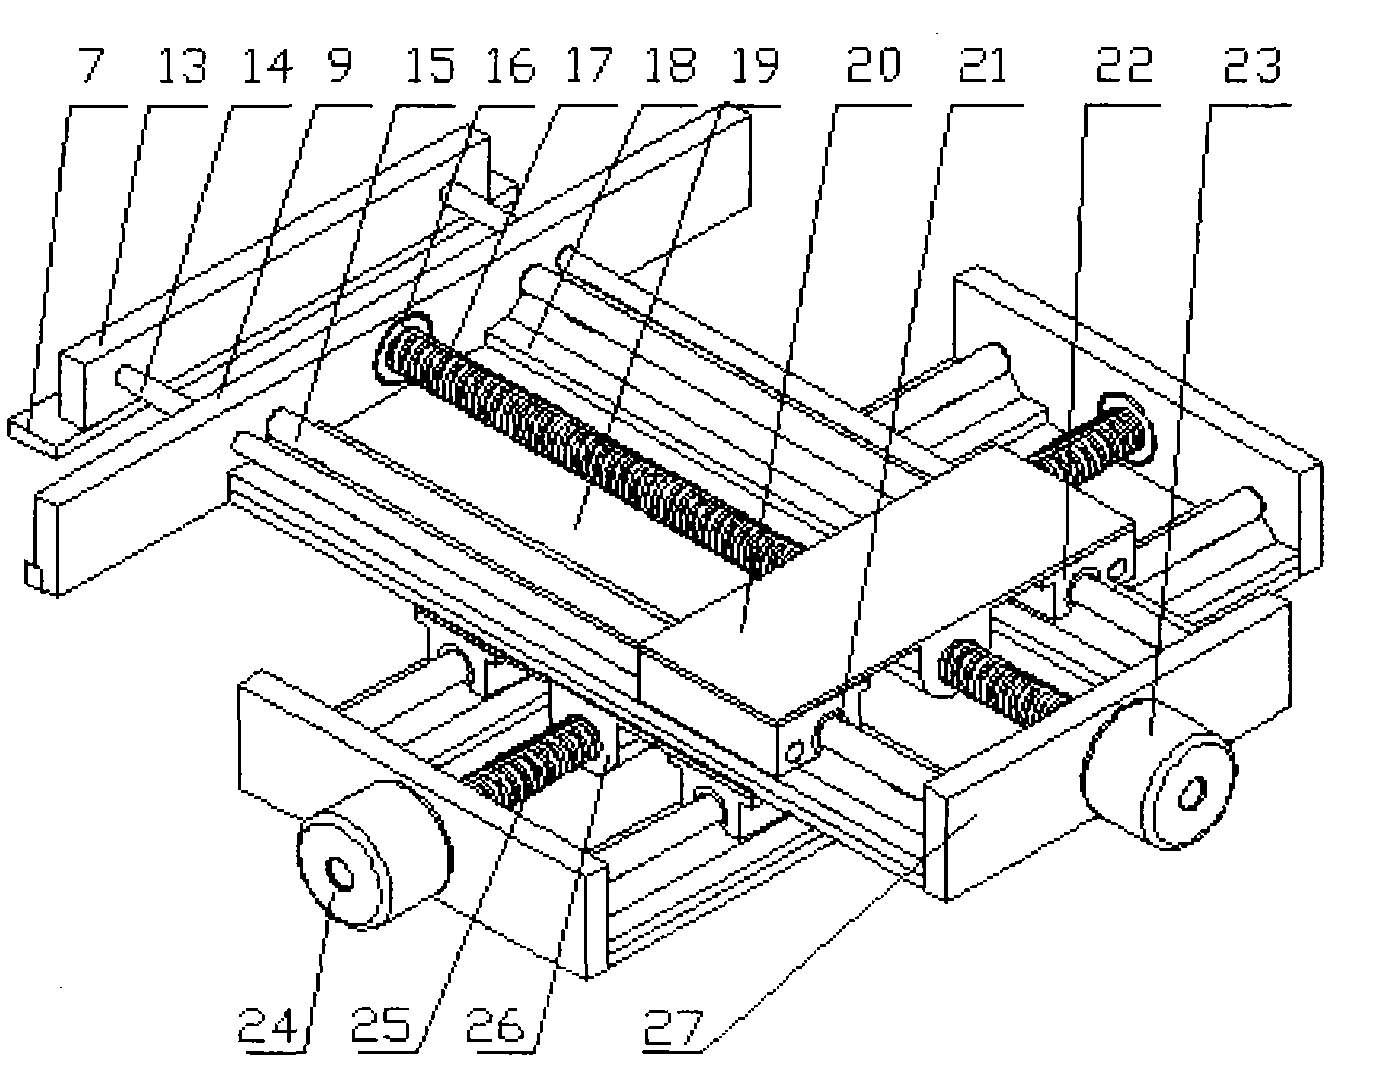 Universal automatic feeding device for punch press